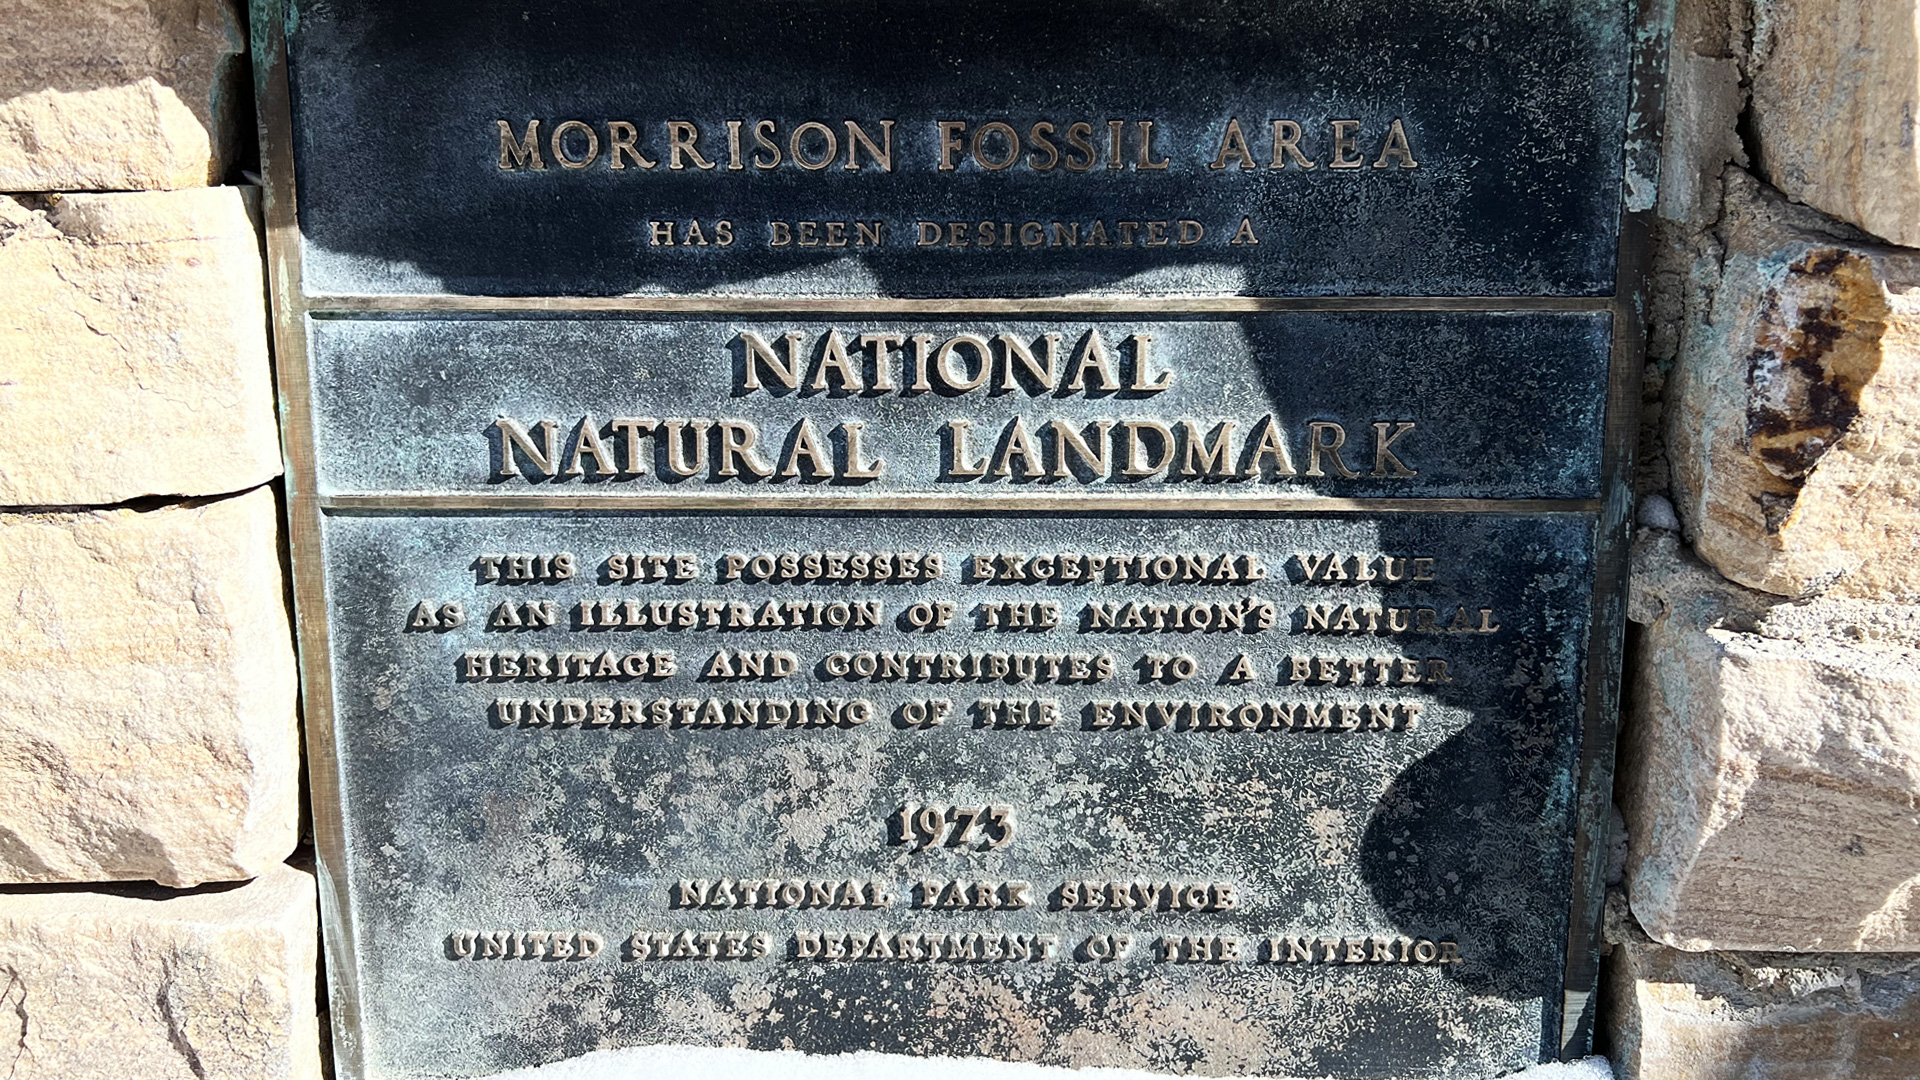 photo of plaque: Morrison Area has been designated a National Natural Landmark 1973